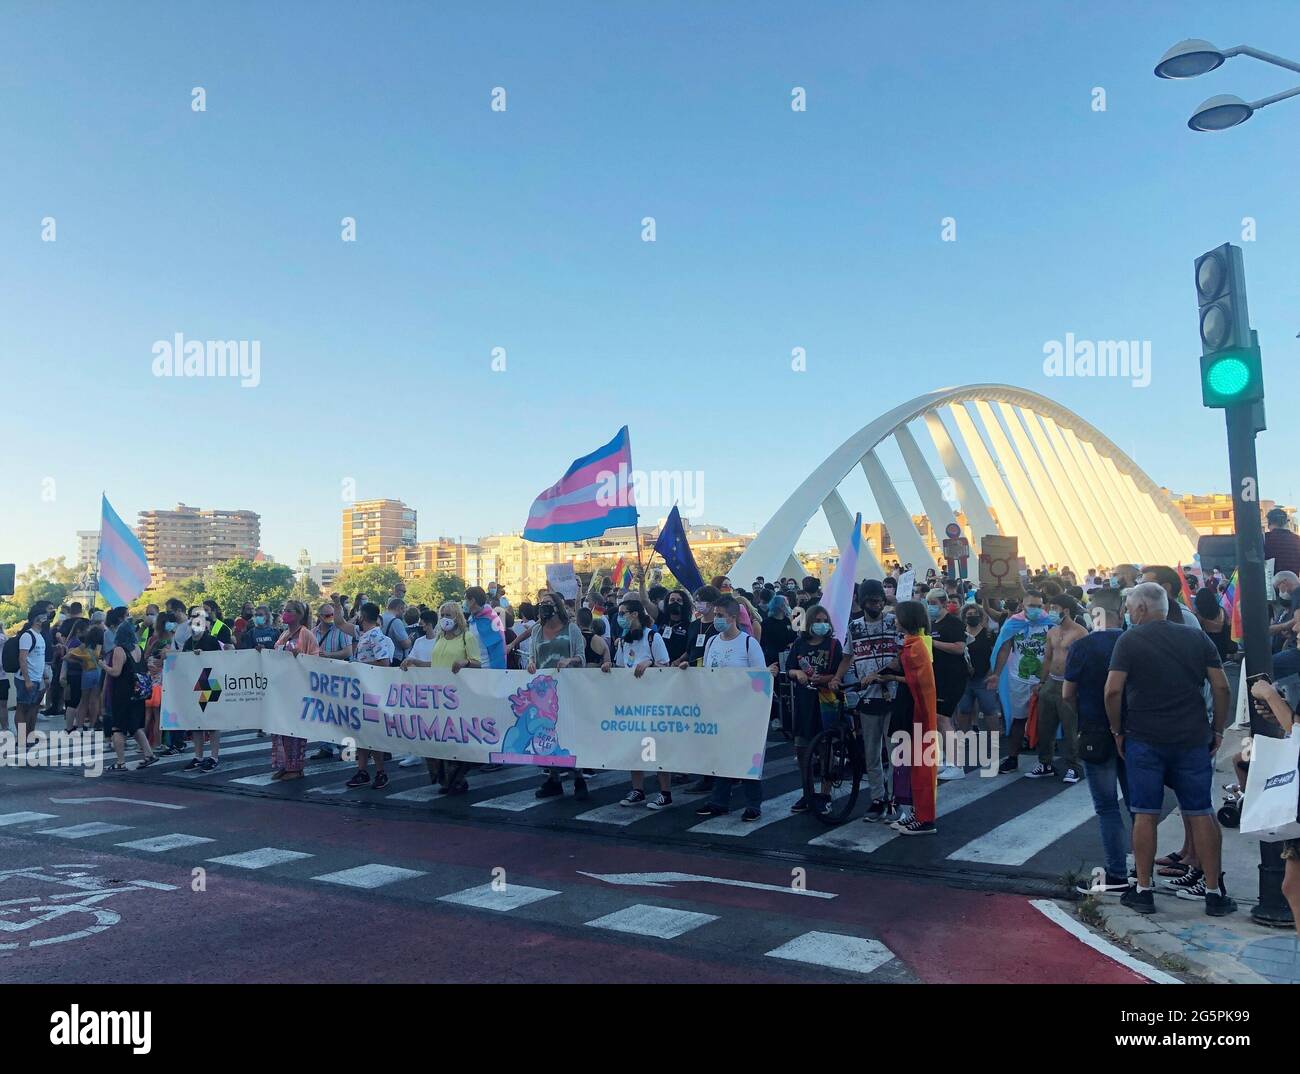 VALENCIA, SPAIN - Jun 28, 2021: Open LGBT Pride Manifestation 2021 in the city of Valencia as a celebration of the International Gay Pride Day. March Stock Photo